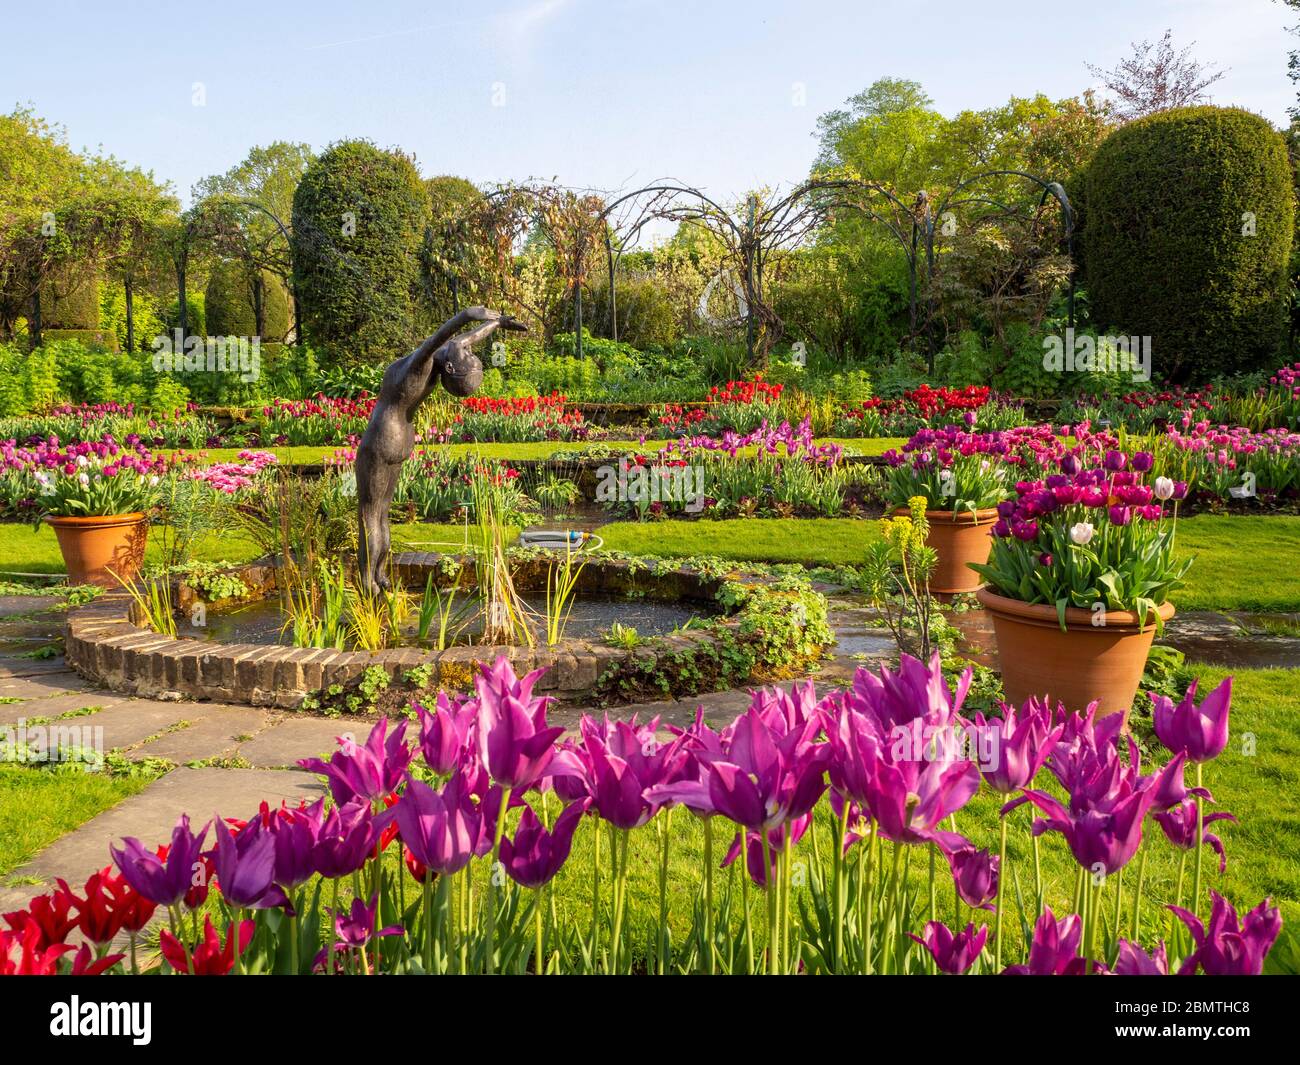 Chenies Manor Sunken garden ornamental pond with sculpture of a diver, vibrant purple, mauves and red tulips on two levels of lawn in bright sunshine. Stock Photo